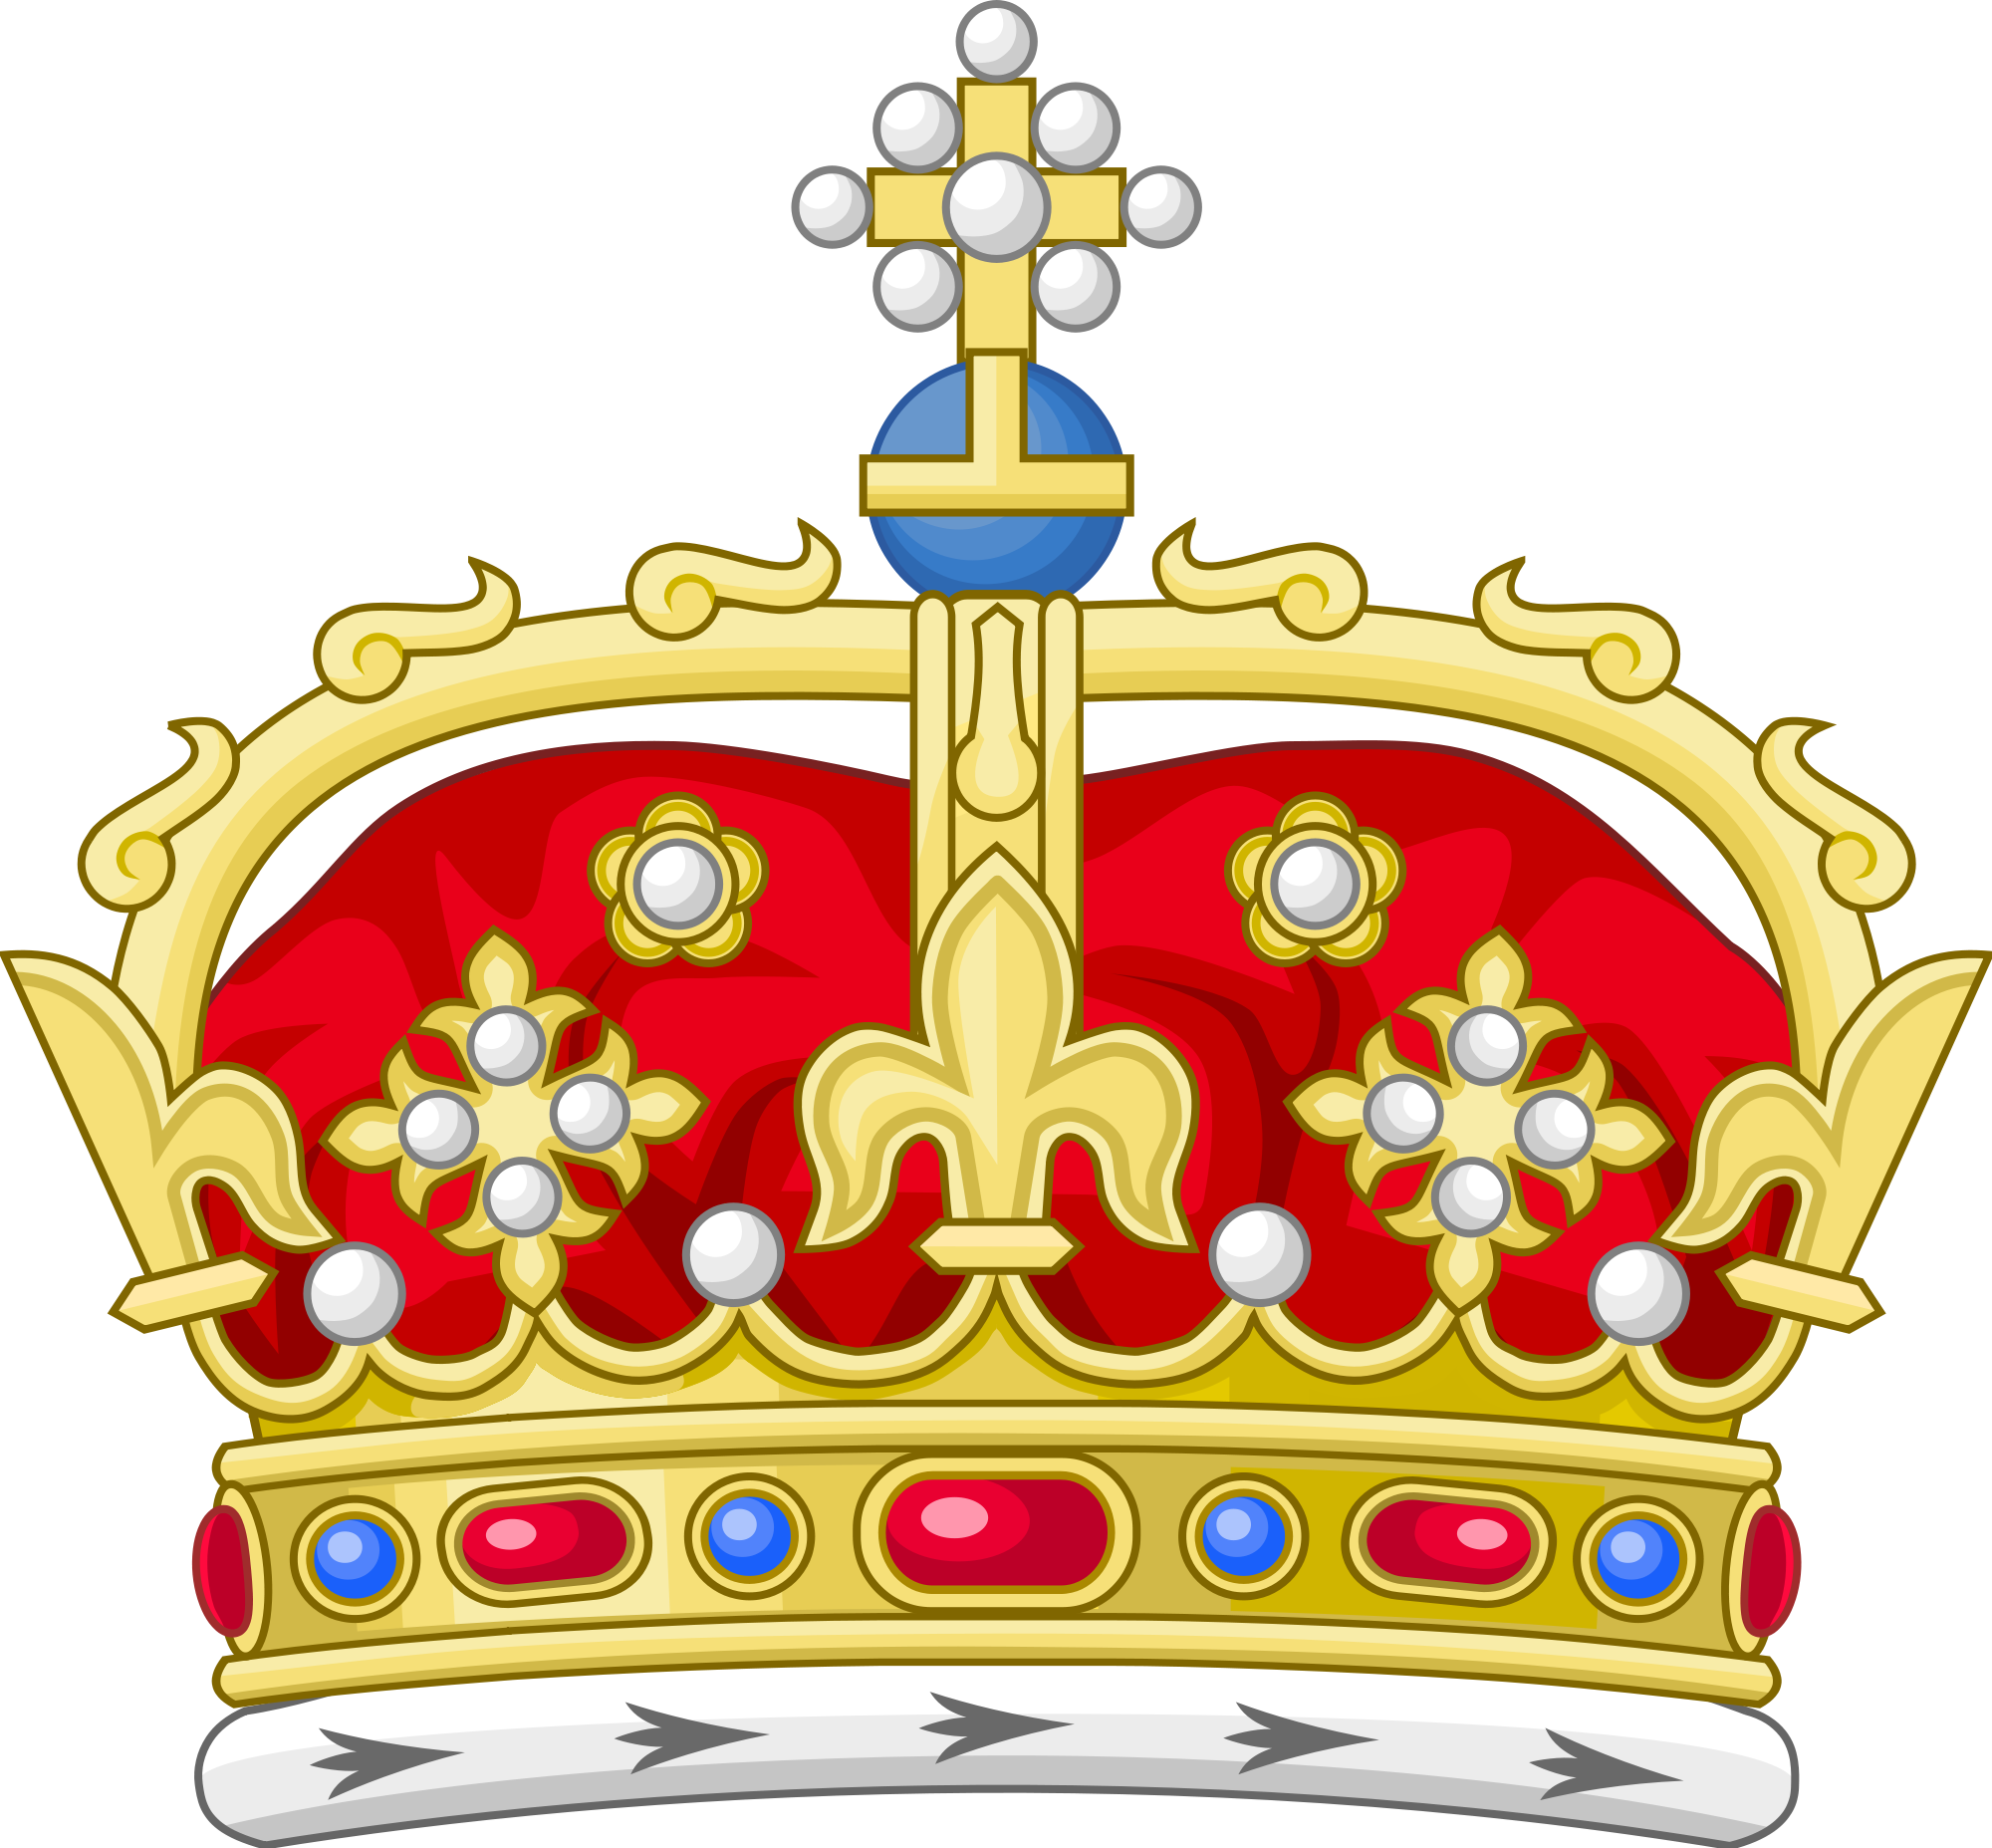 Download Crowns clipart english crown, Crowns english crown ...